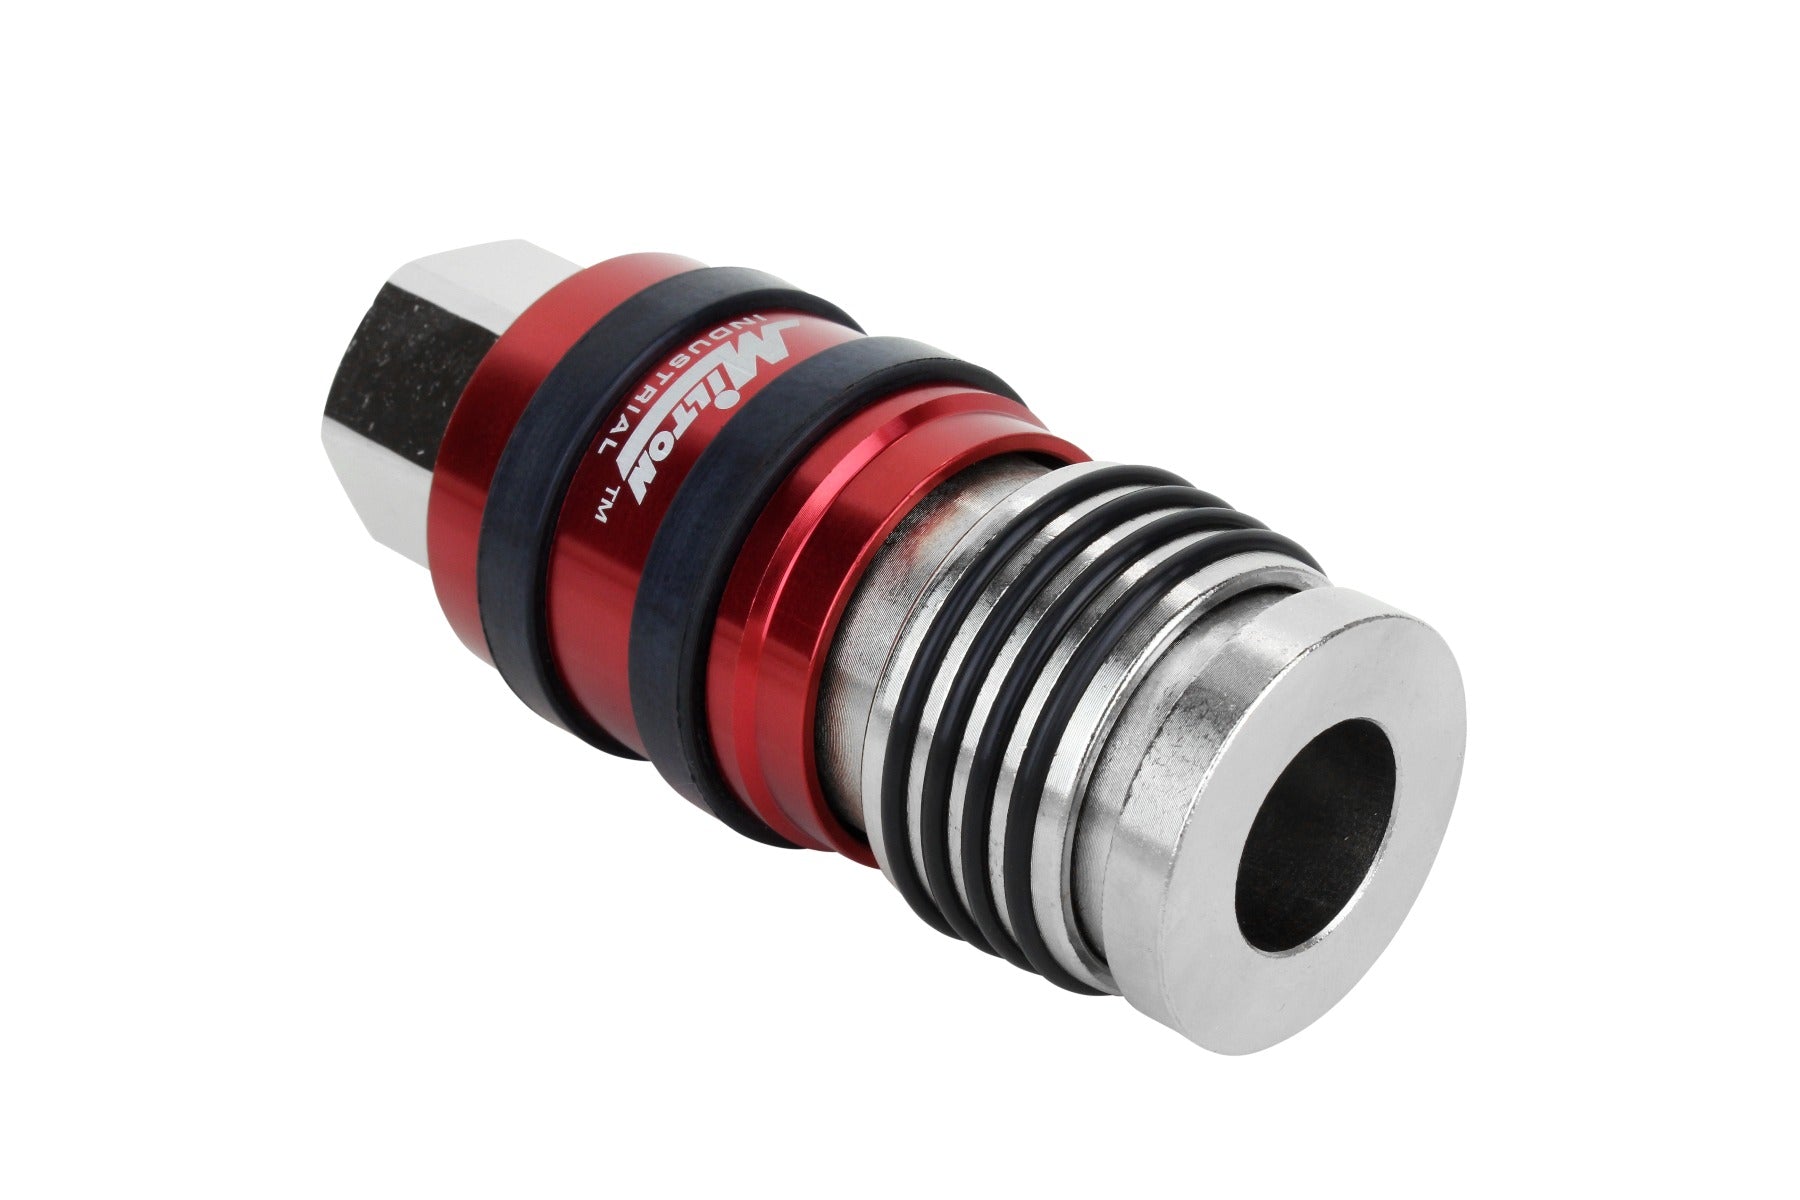 2 In ONEâ„¢ Universal Safety Exhaust Coupler 1/4 NPT x 3/8 Body Flow —  Milton® Industries Inc.